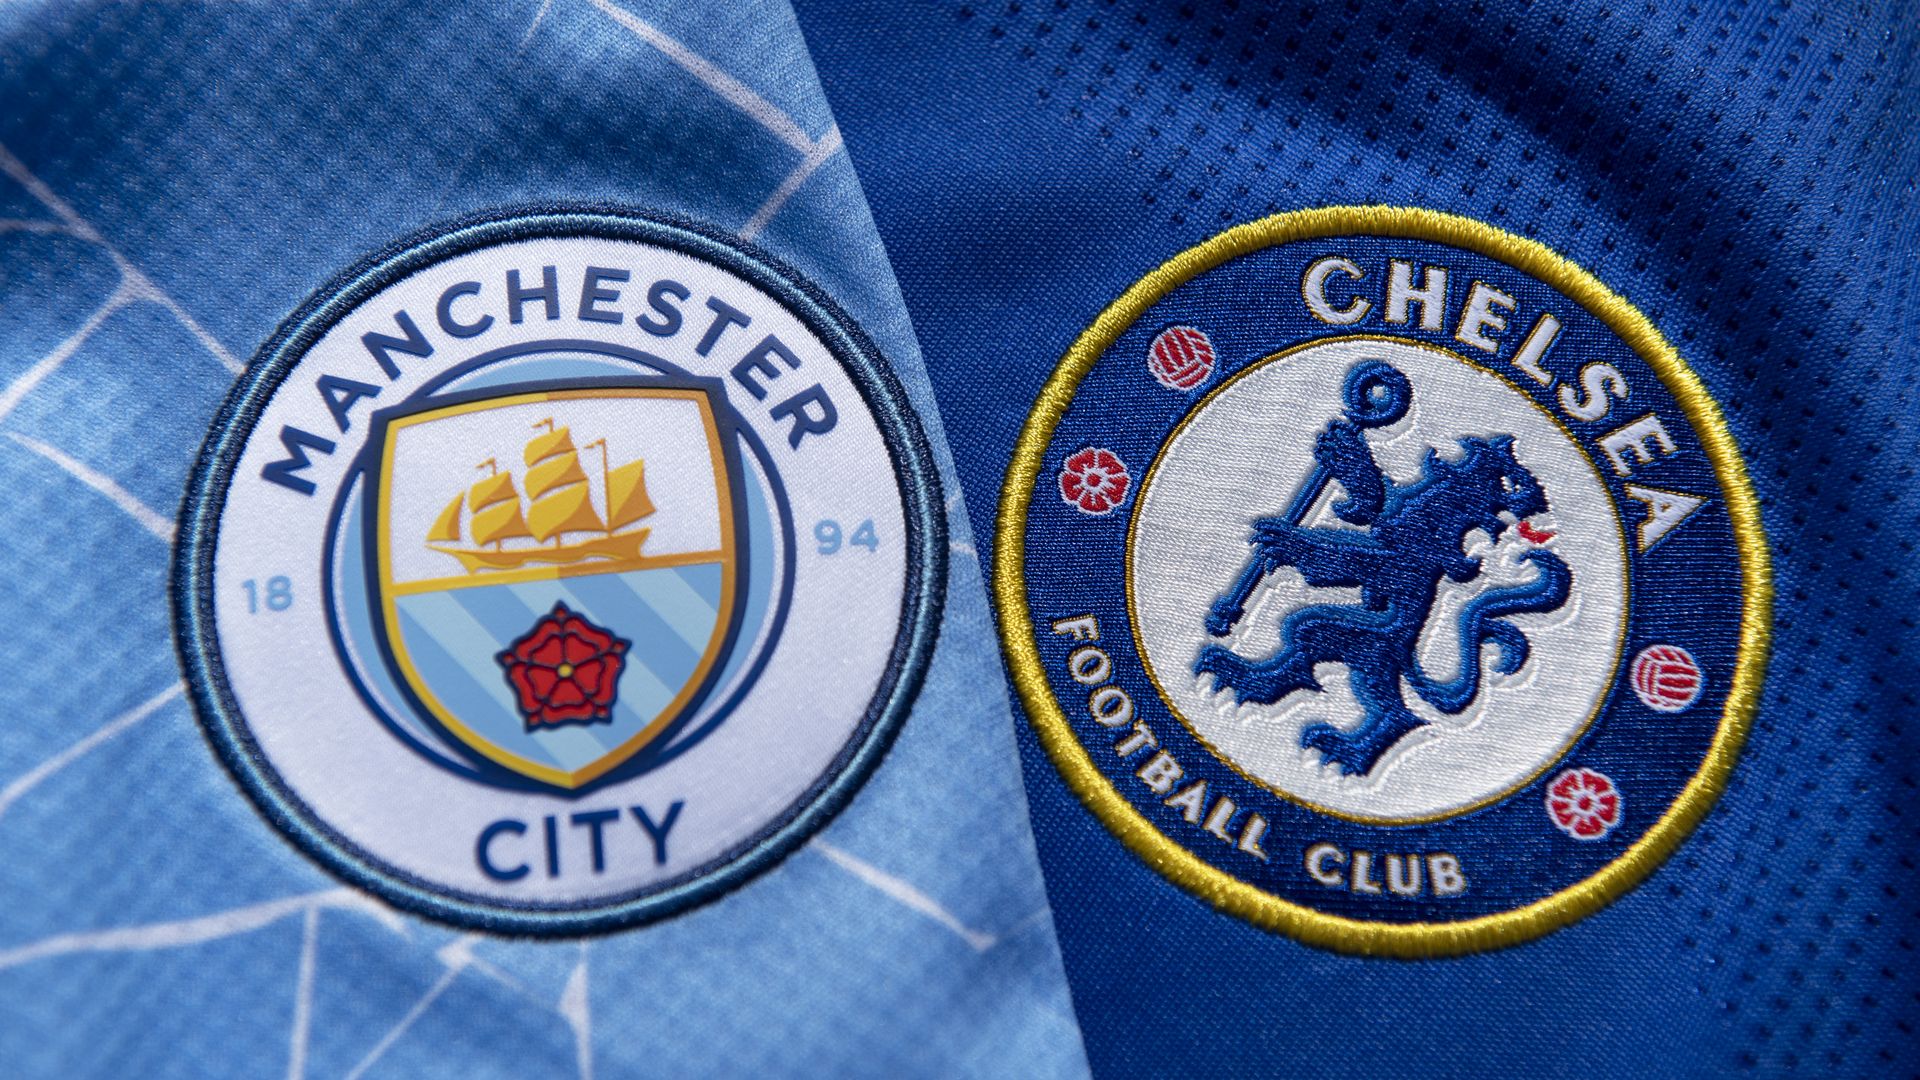 Man City and Chelsea logos